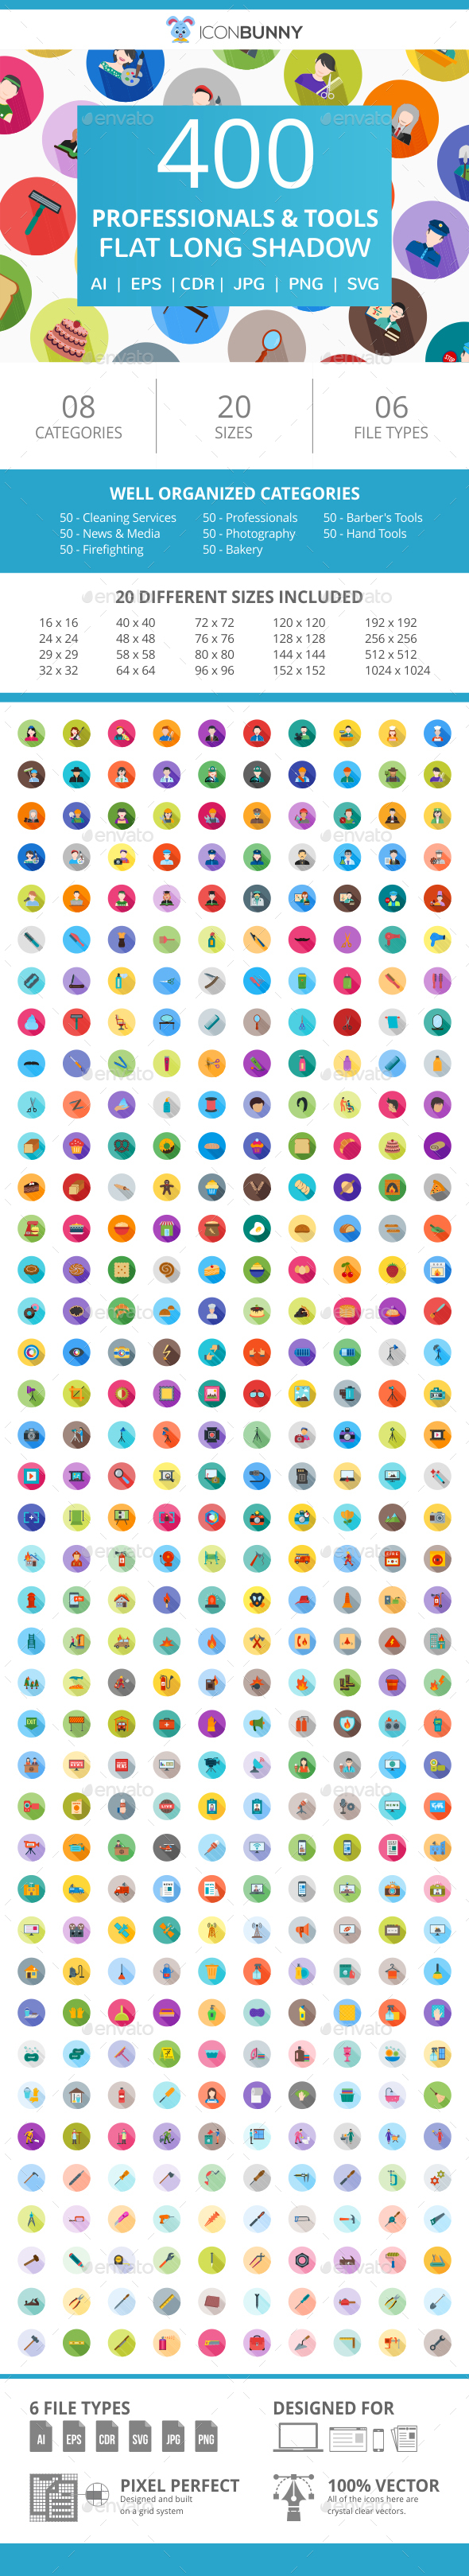 400 Professionals & their Tools Flat Long Shadow Icons